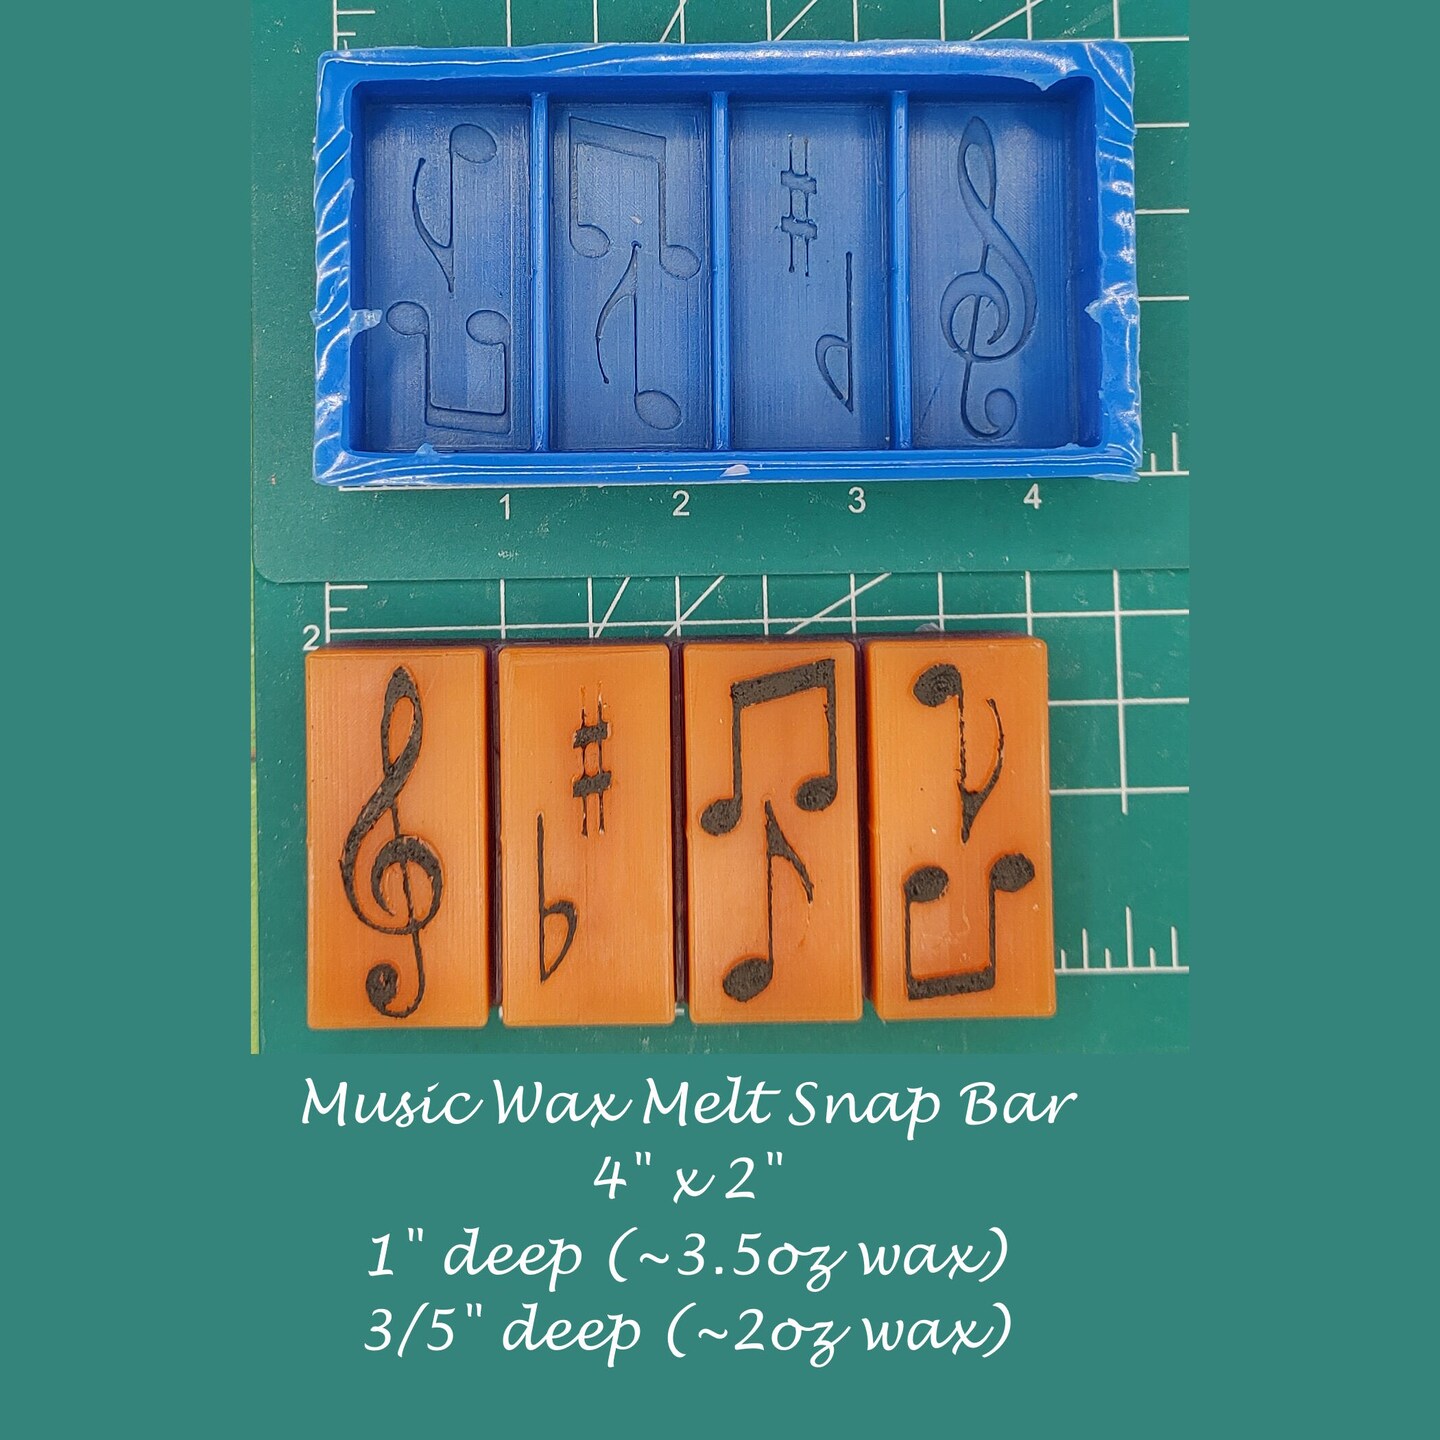  Wax Melt Molds Silicone,Rectangle Silicone Wax Melt